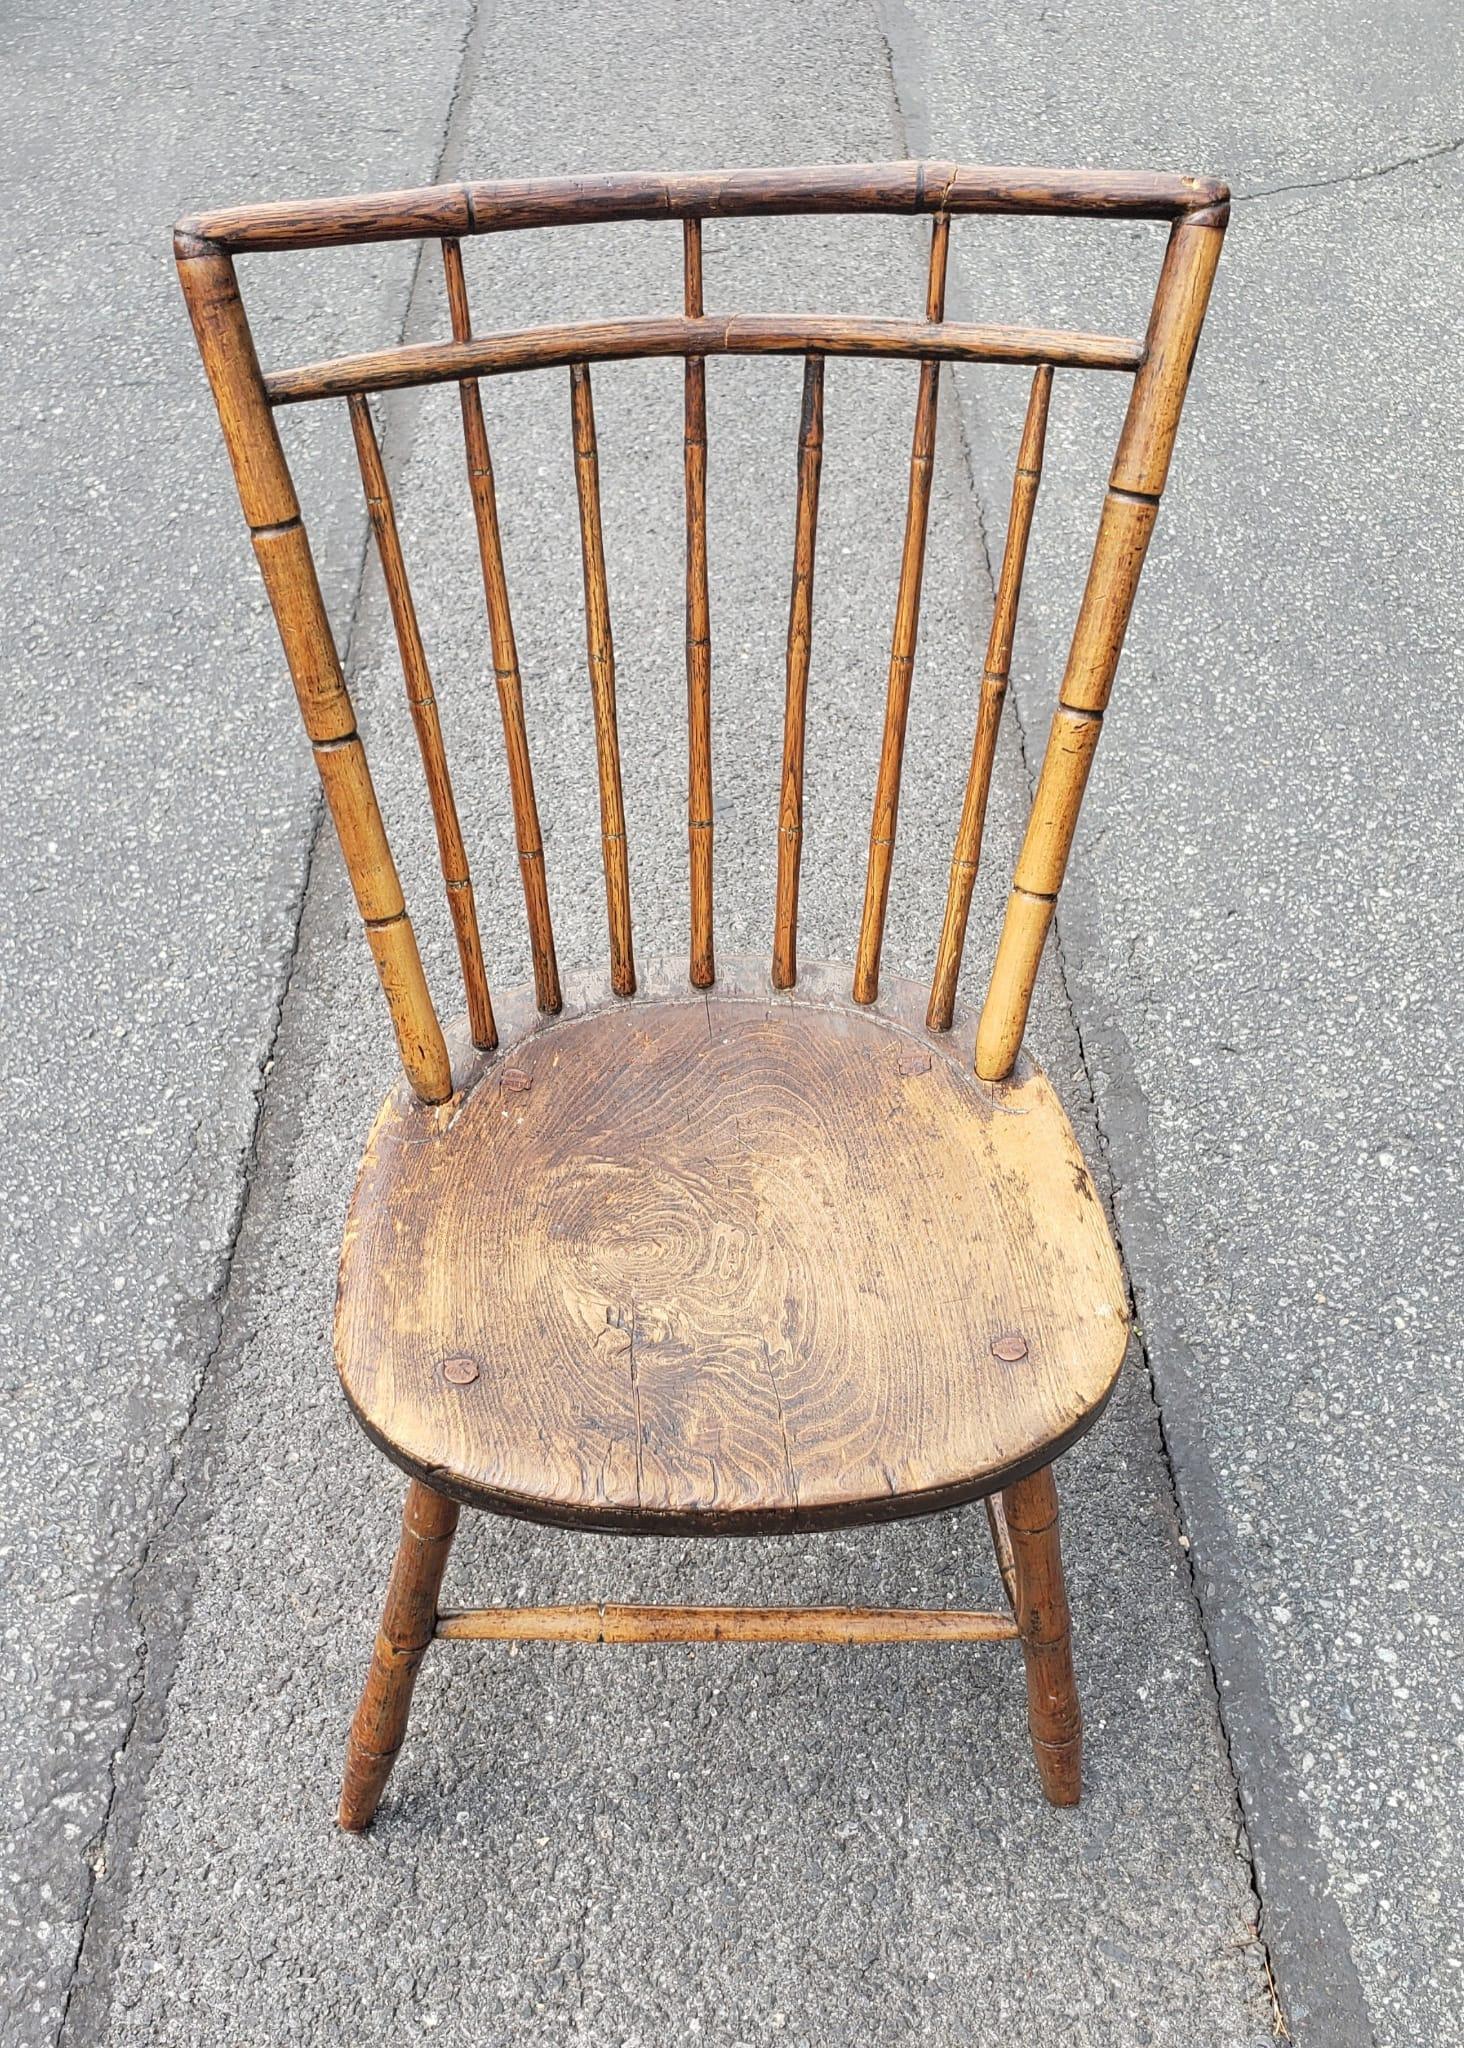 A 19th Century maple faux bamboo windsor side chair with patina. Meaurw 16